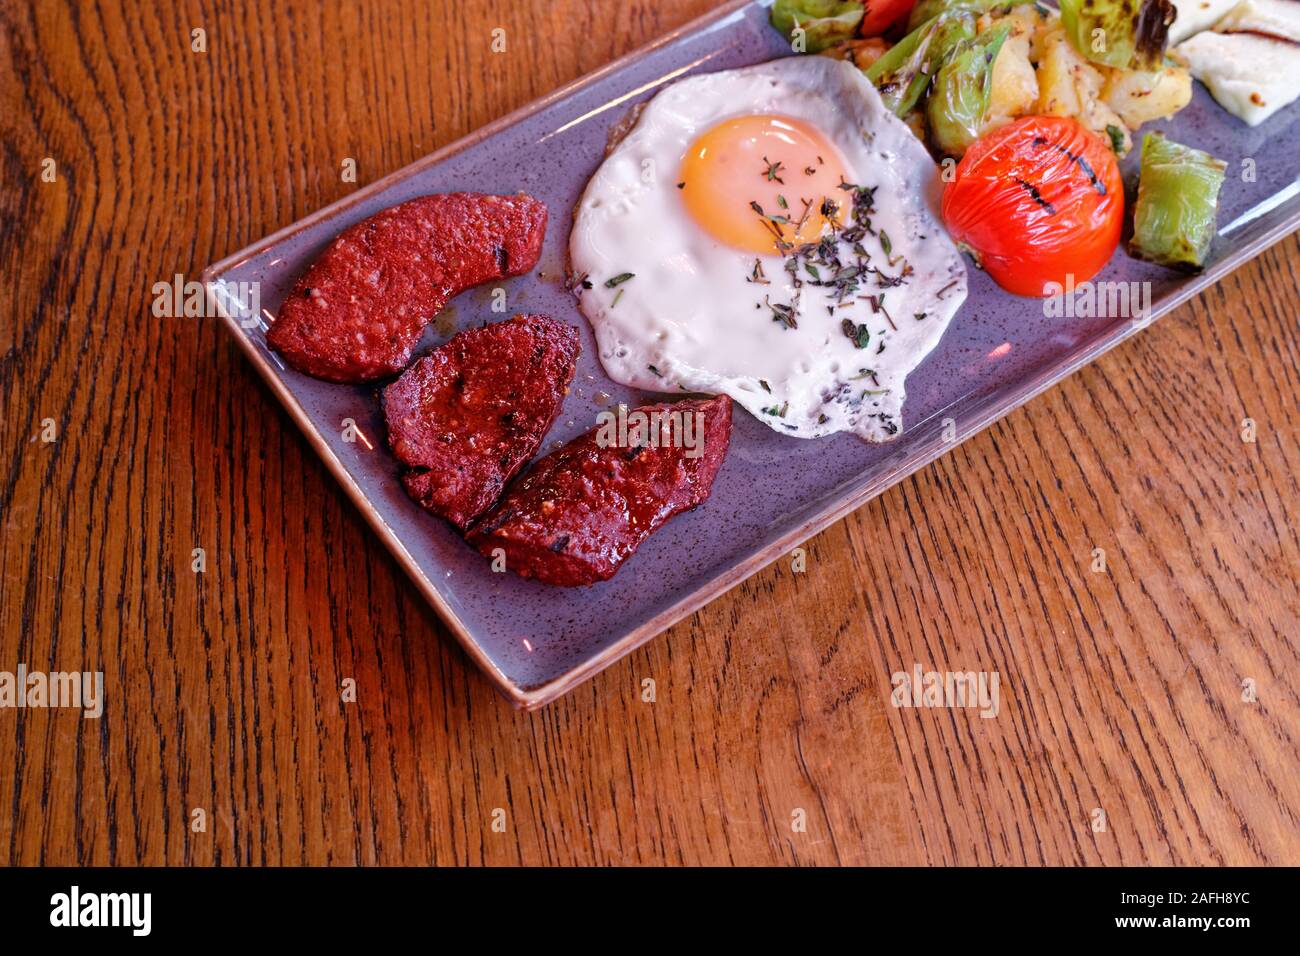 Turkish roasted breakfast plate with fermented bologna sausage (sudjuk), grilled egg, hallouim (hellim) cheese, boiled potatoe, green pepper and roast Stock Photo